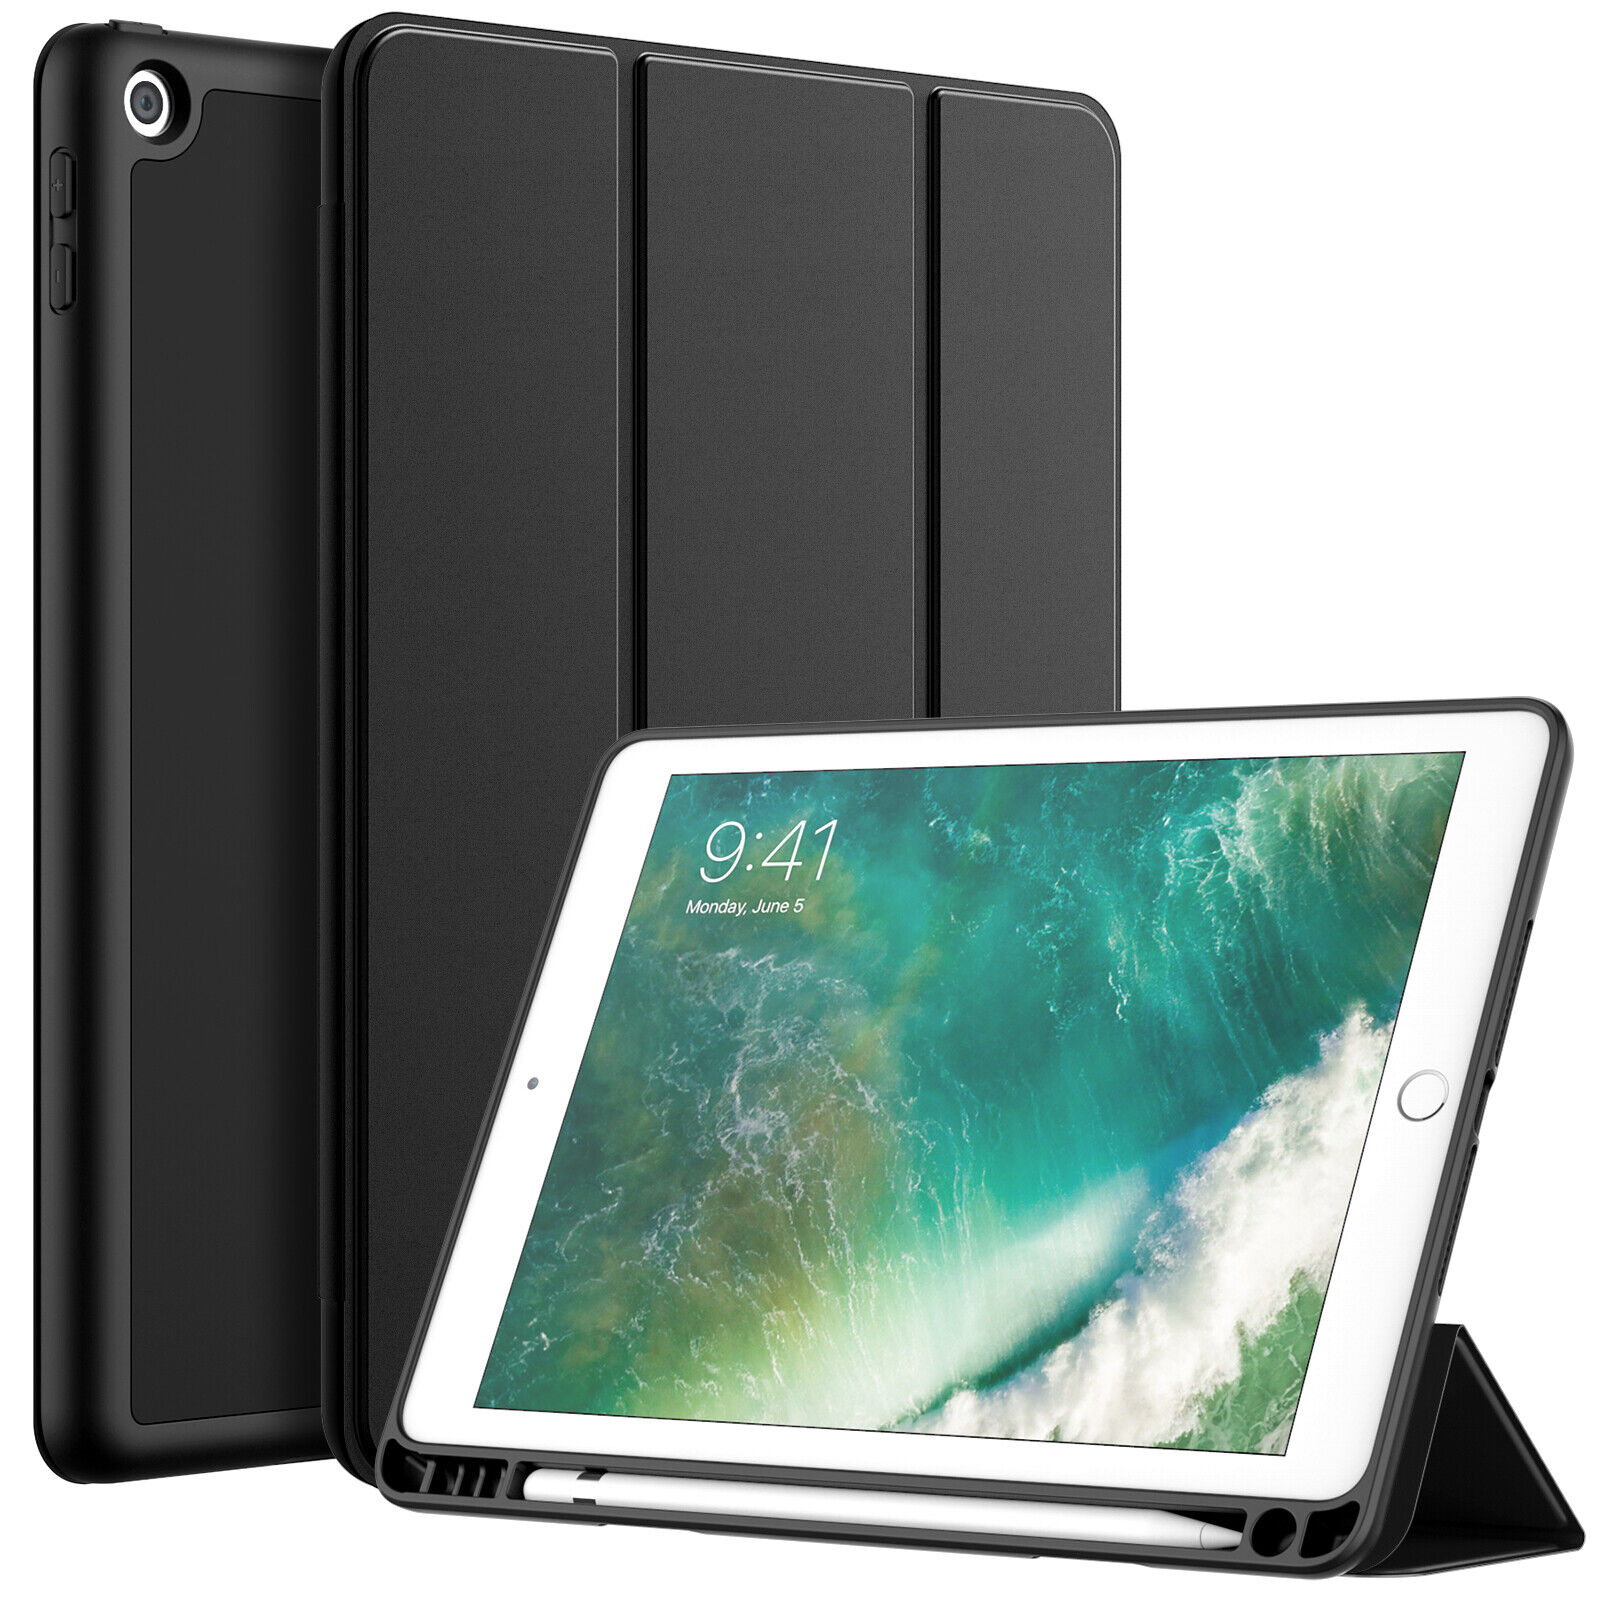 JETech Case for iPad 9.7-Inch 6th/5th Generation 2018/2017 with Pencil Holder